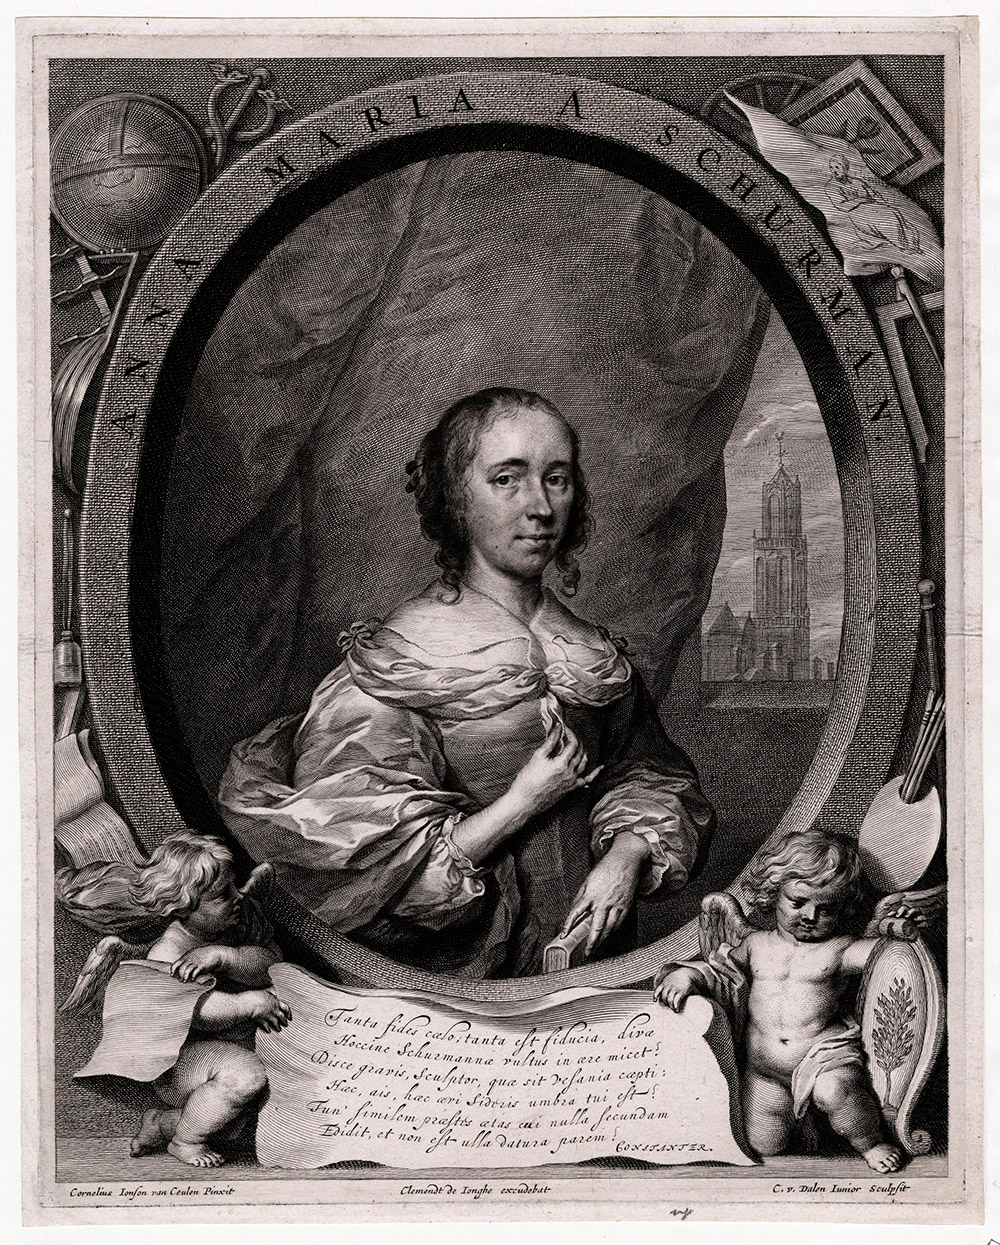 A woman standing with her head turned three-quarters to the left, looking straight forward with left hand up on the middle of her chest and right hand slightly down hold a book. An oval shape frames her with the name “Anna Maria A Schurman” on the top portion and with two babies, one on the bottom left and right, along with a globe and other objects around the frame representing science, the arts, literature, and music. A drape is behind her and in the background a building is off to the left.